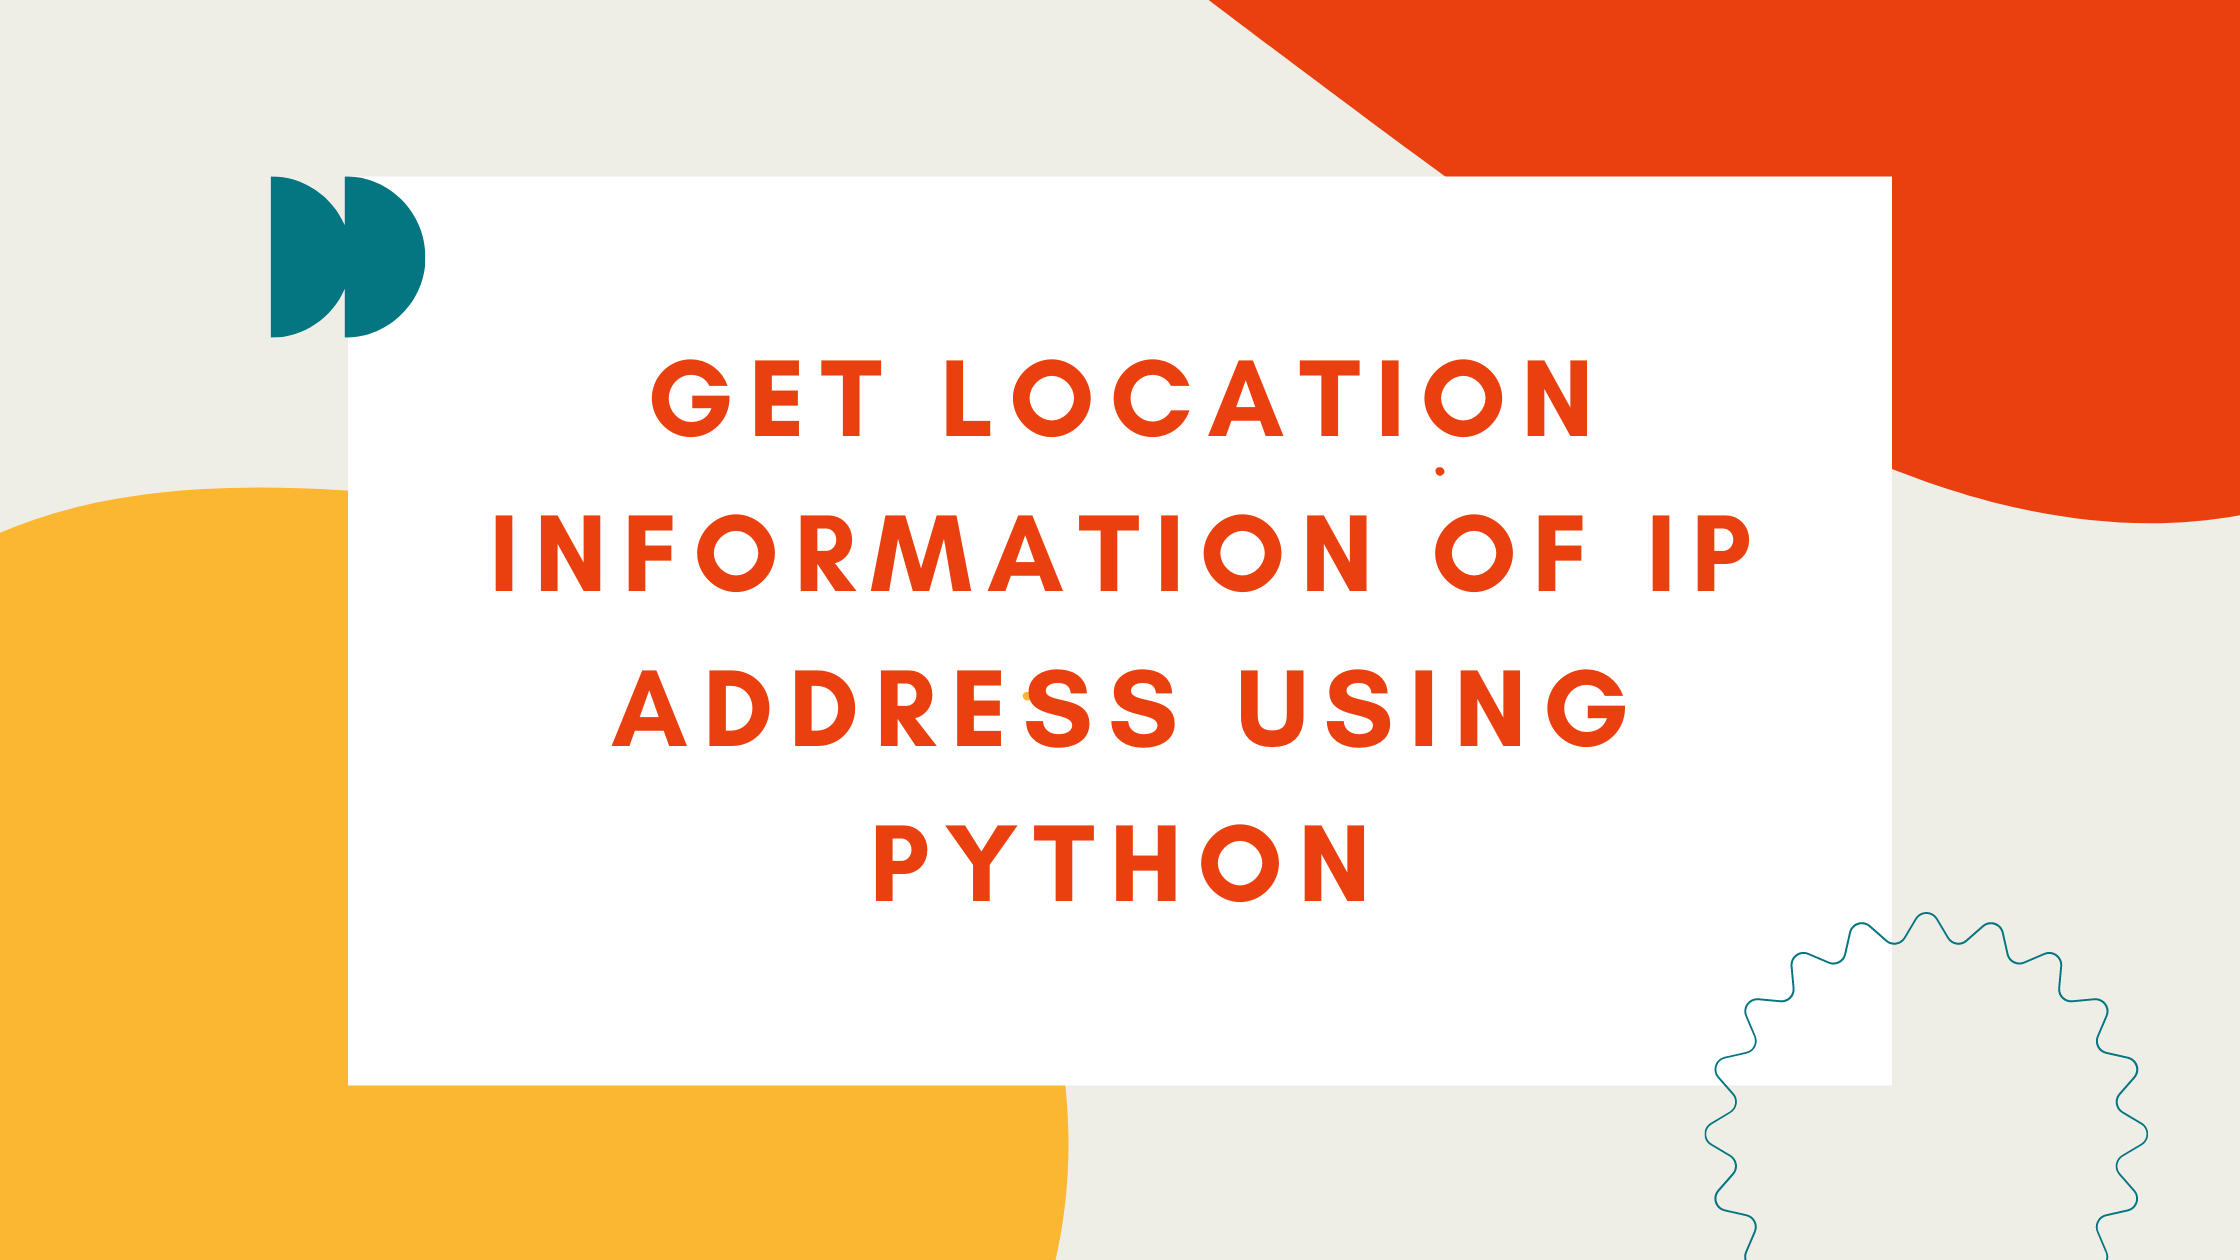 How to Get Location Information of an IP Address Using Python